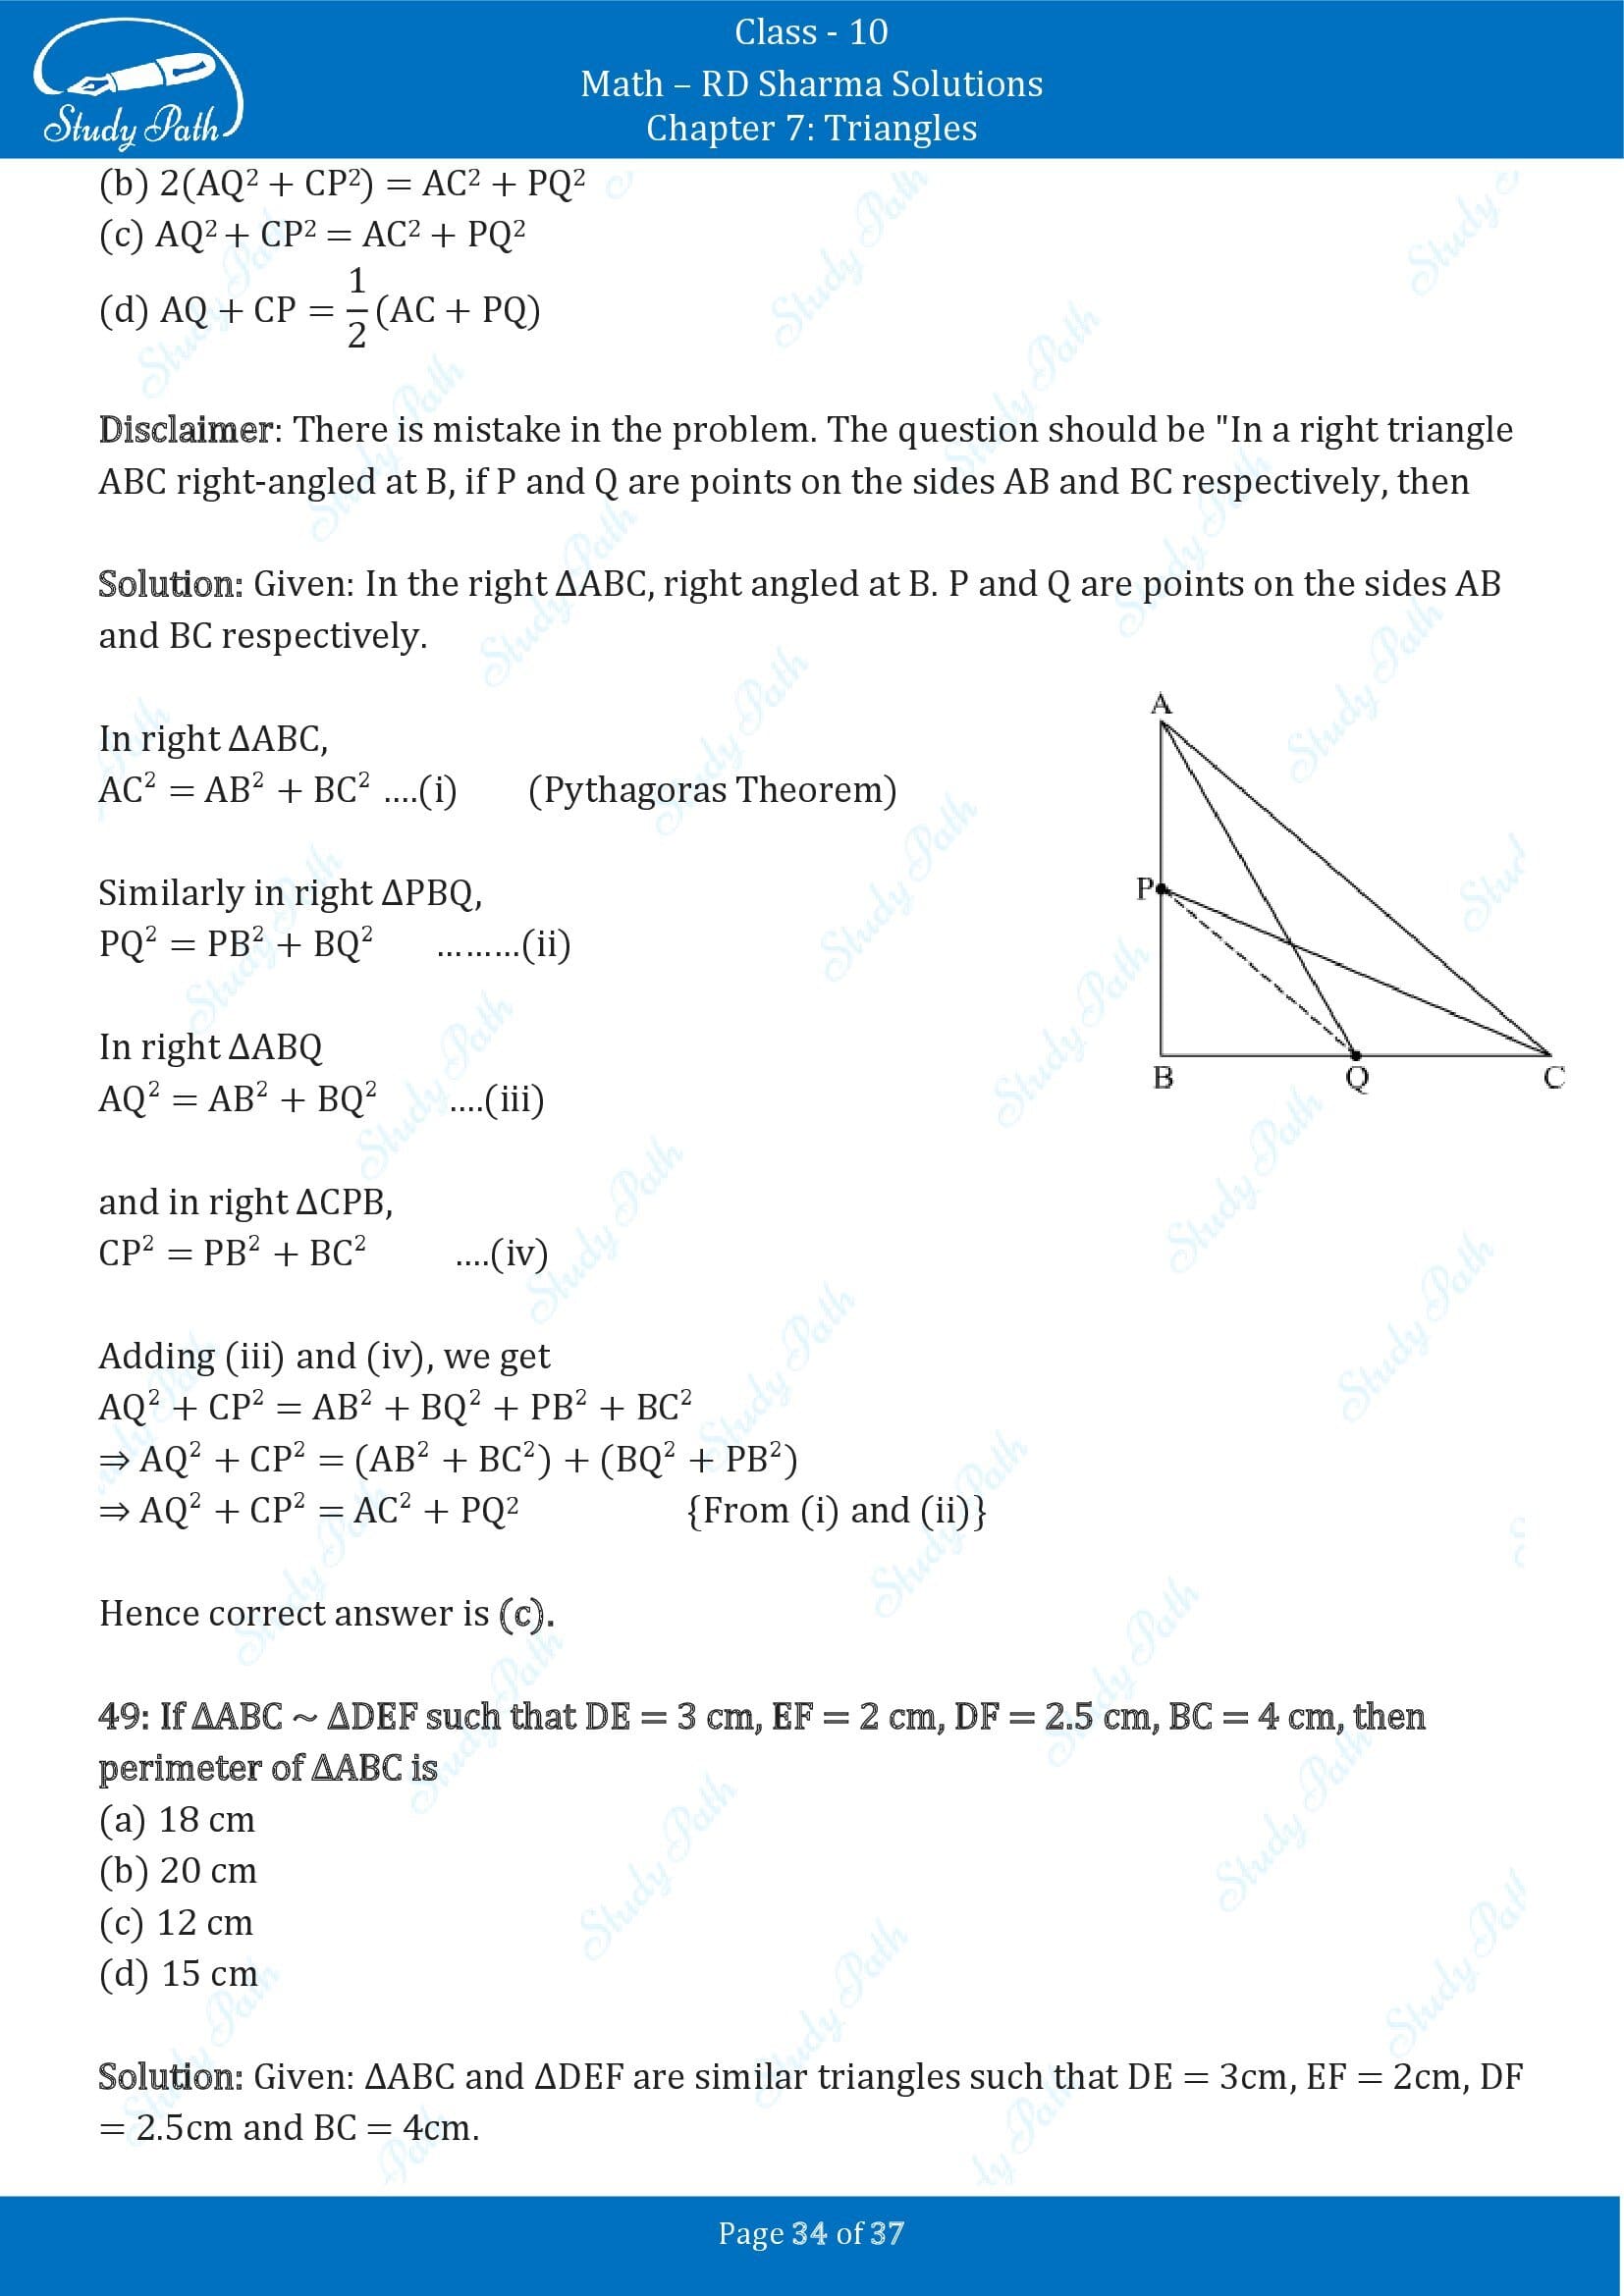 RD Sharma Solutions Class 10 Chapter 7 Triangles Multiple Choice Question MCQs 00034